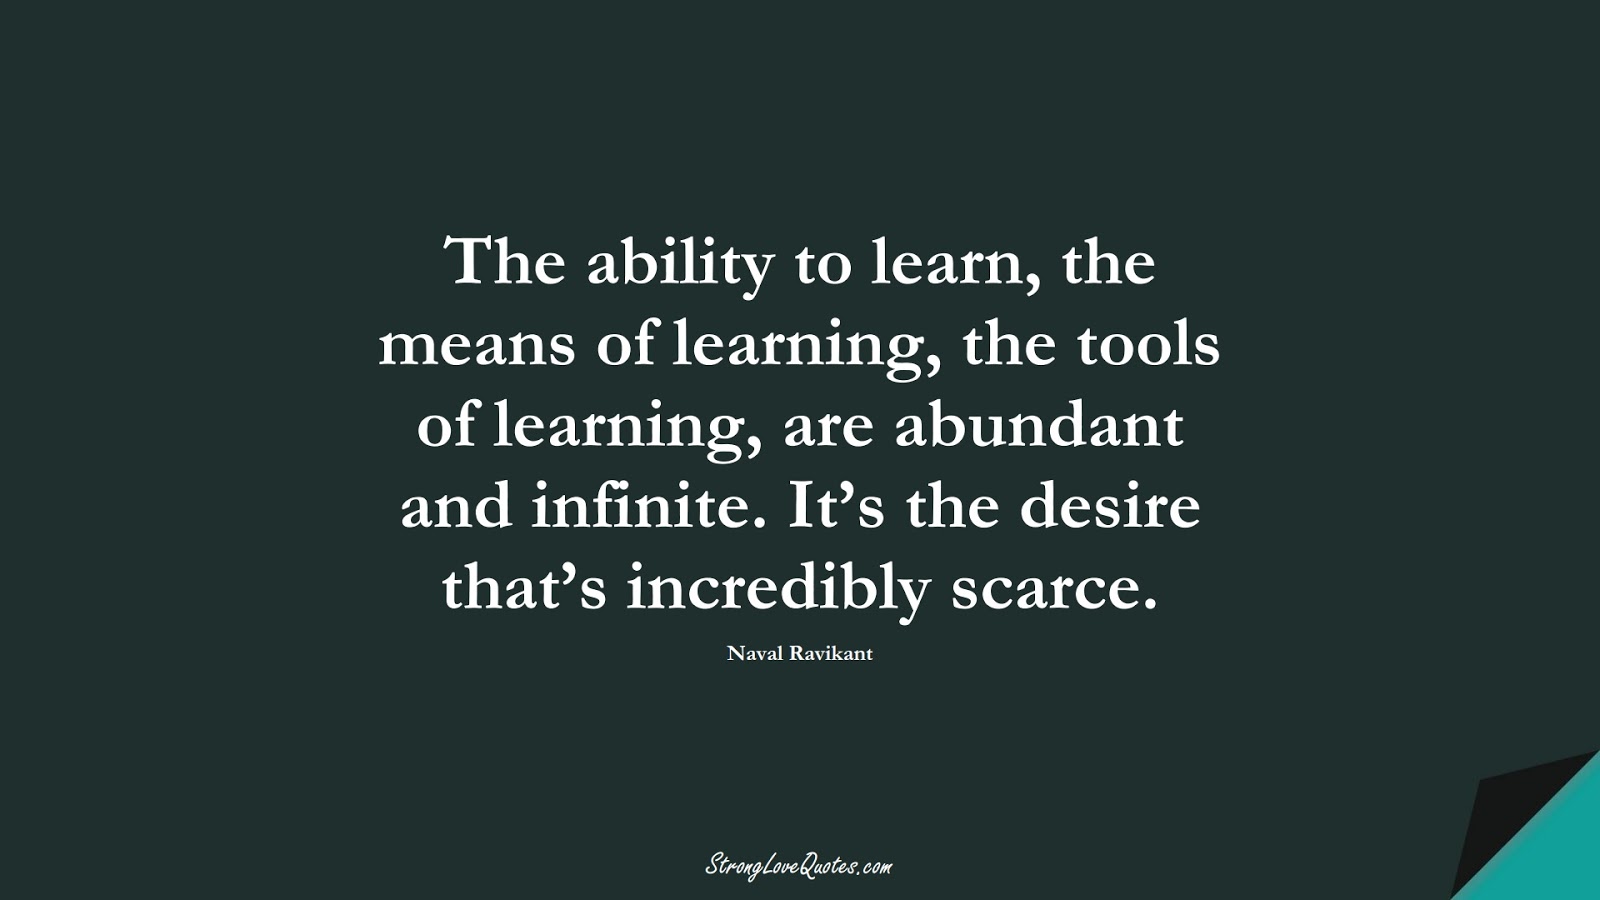 The ability to learn, the means of learning, the tools of learning, are abundant and infinite. It’s the desire that’s incredibly scarce. (Naval Ravikant);  #KnowledgeQuotes